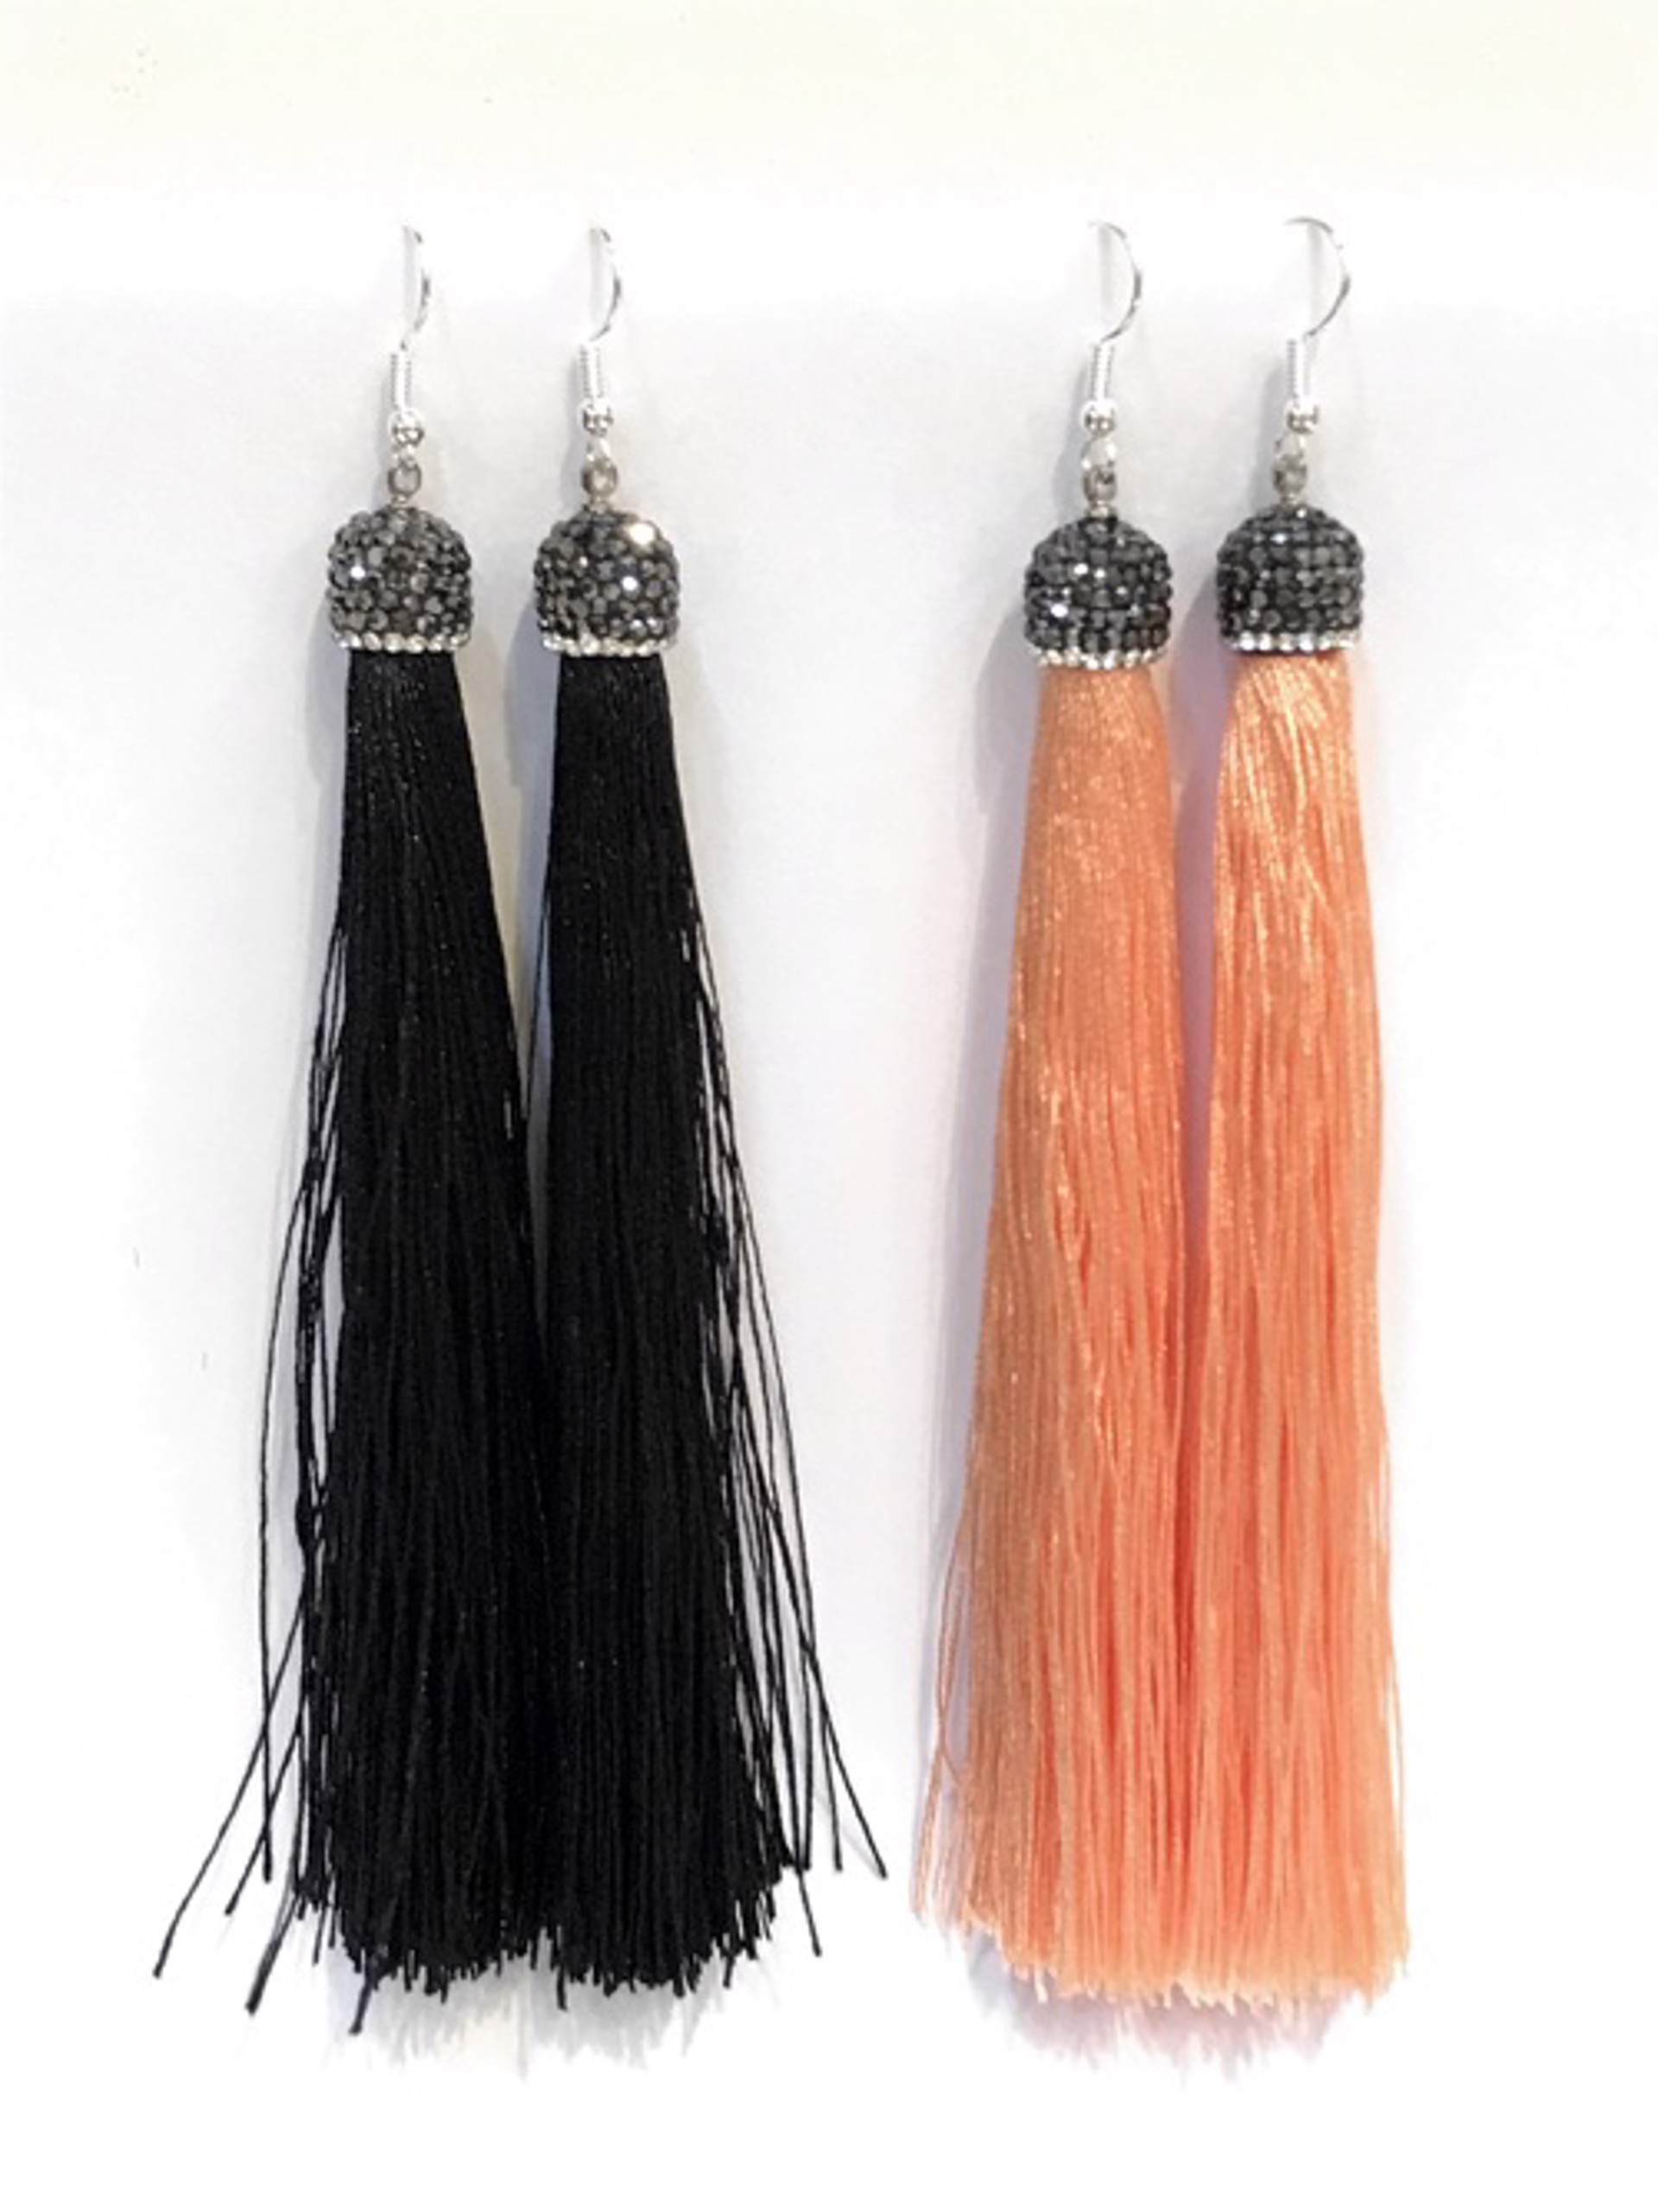 Earrings - Tassel - Assorted colors by Indigo Desert Ranch - Jewelry, Other